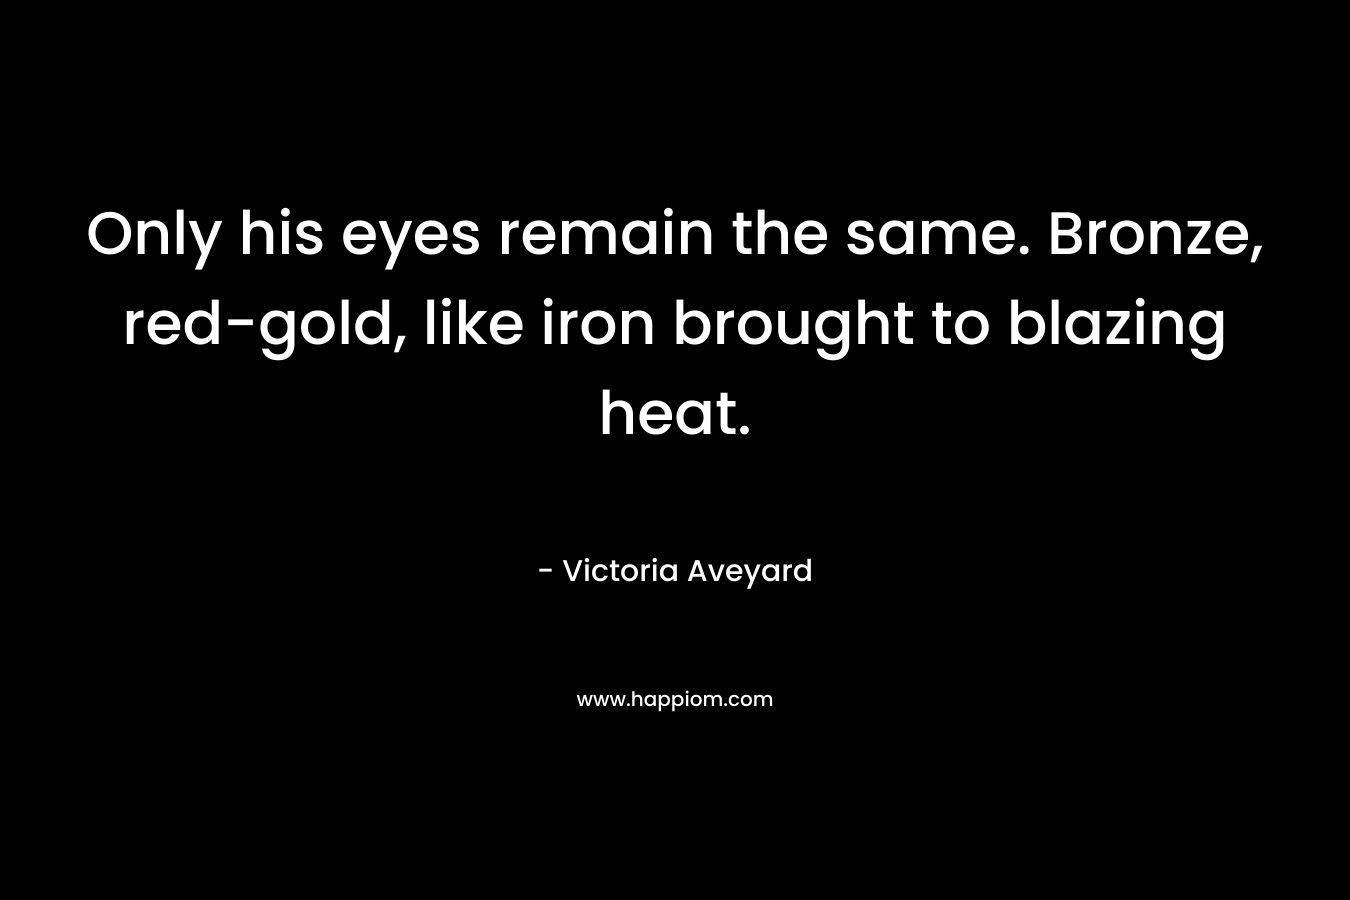 Only his eyes remain the same. Bronze, red-gold, like iron brought to blazing heat. – Victoria Aveyard